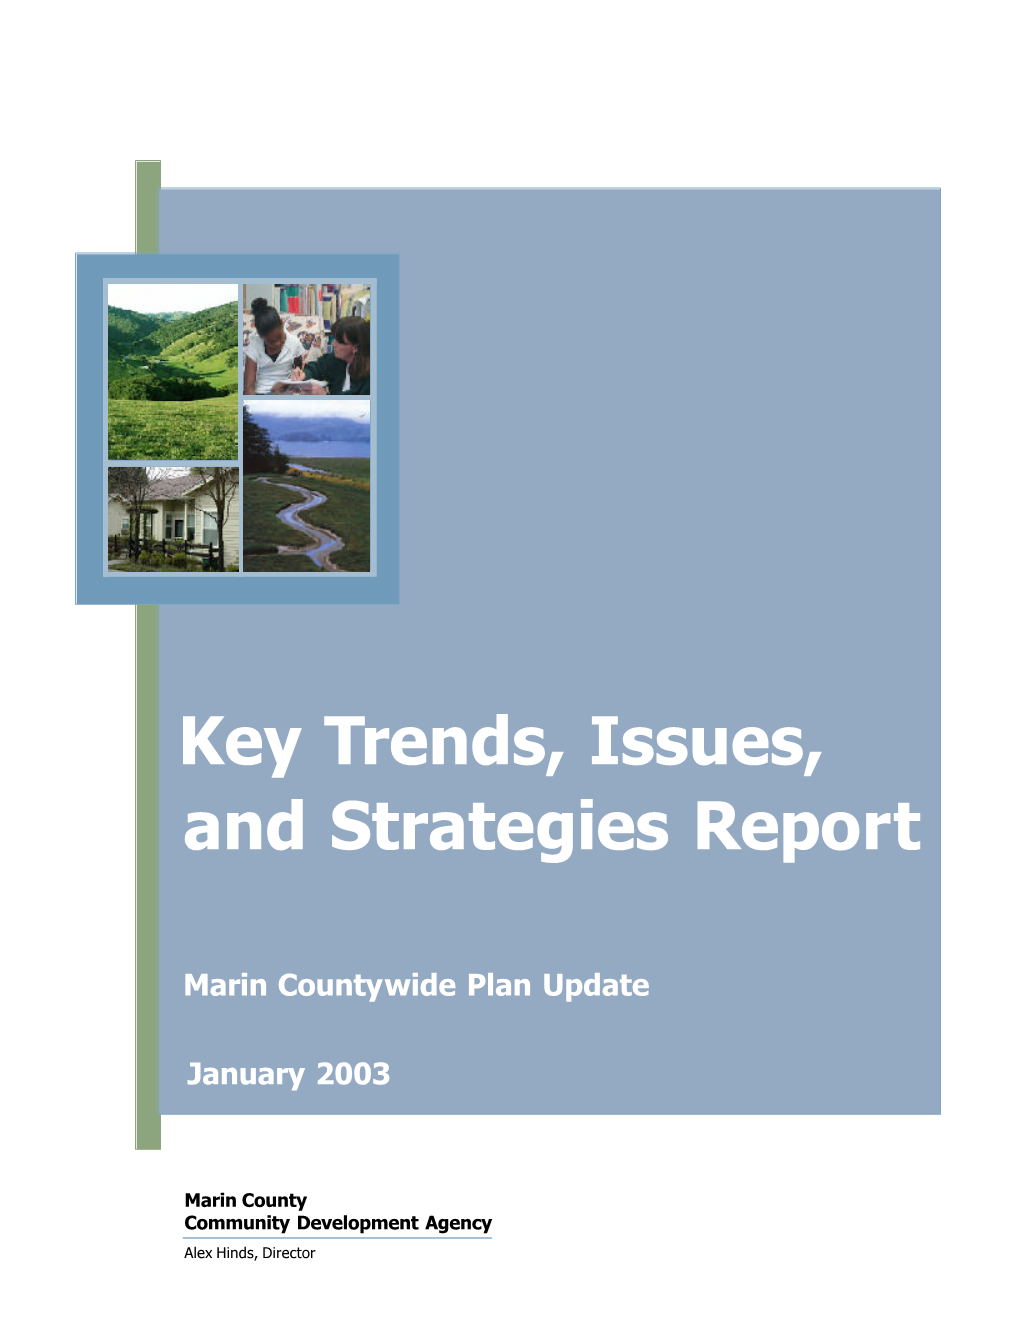 Key Trends, Issues, and Strategies Report